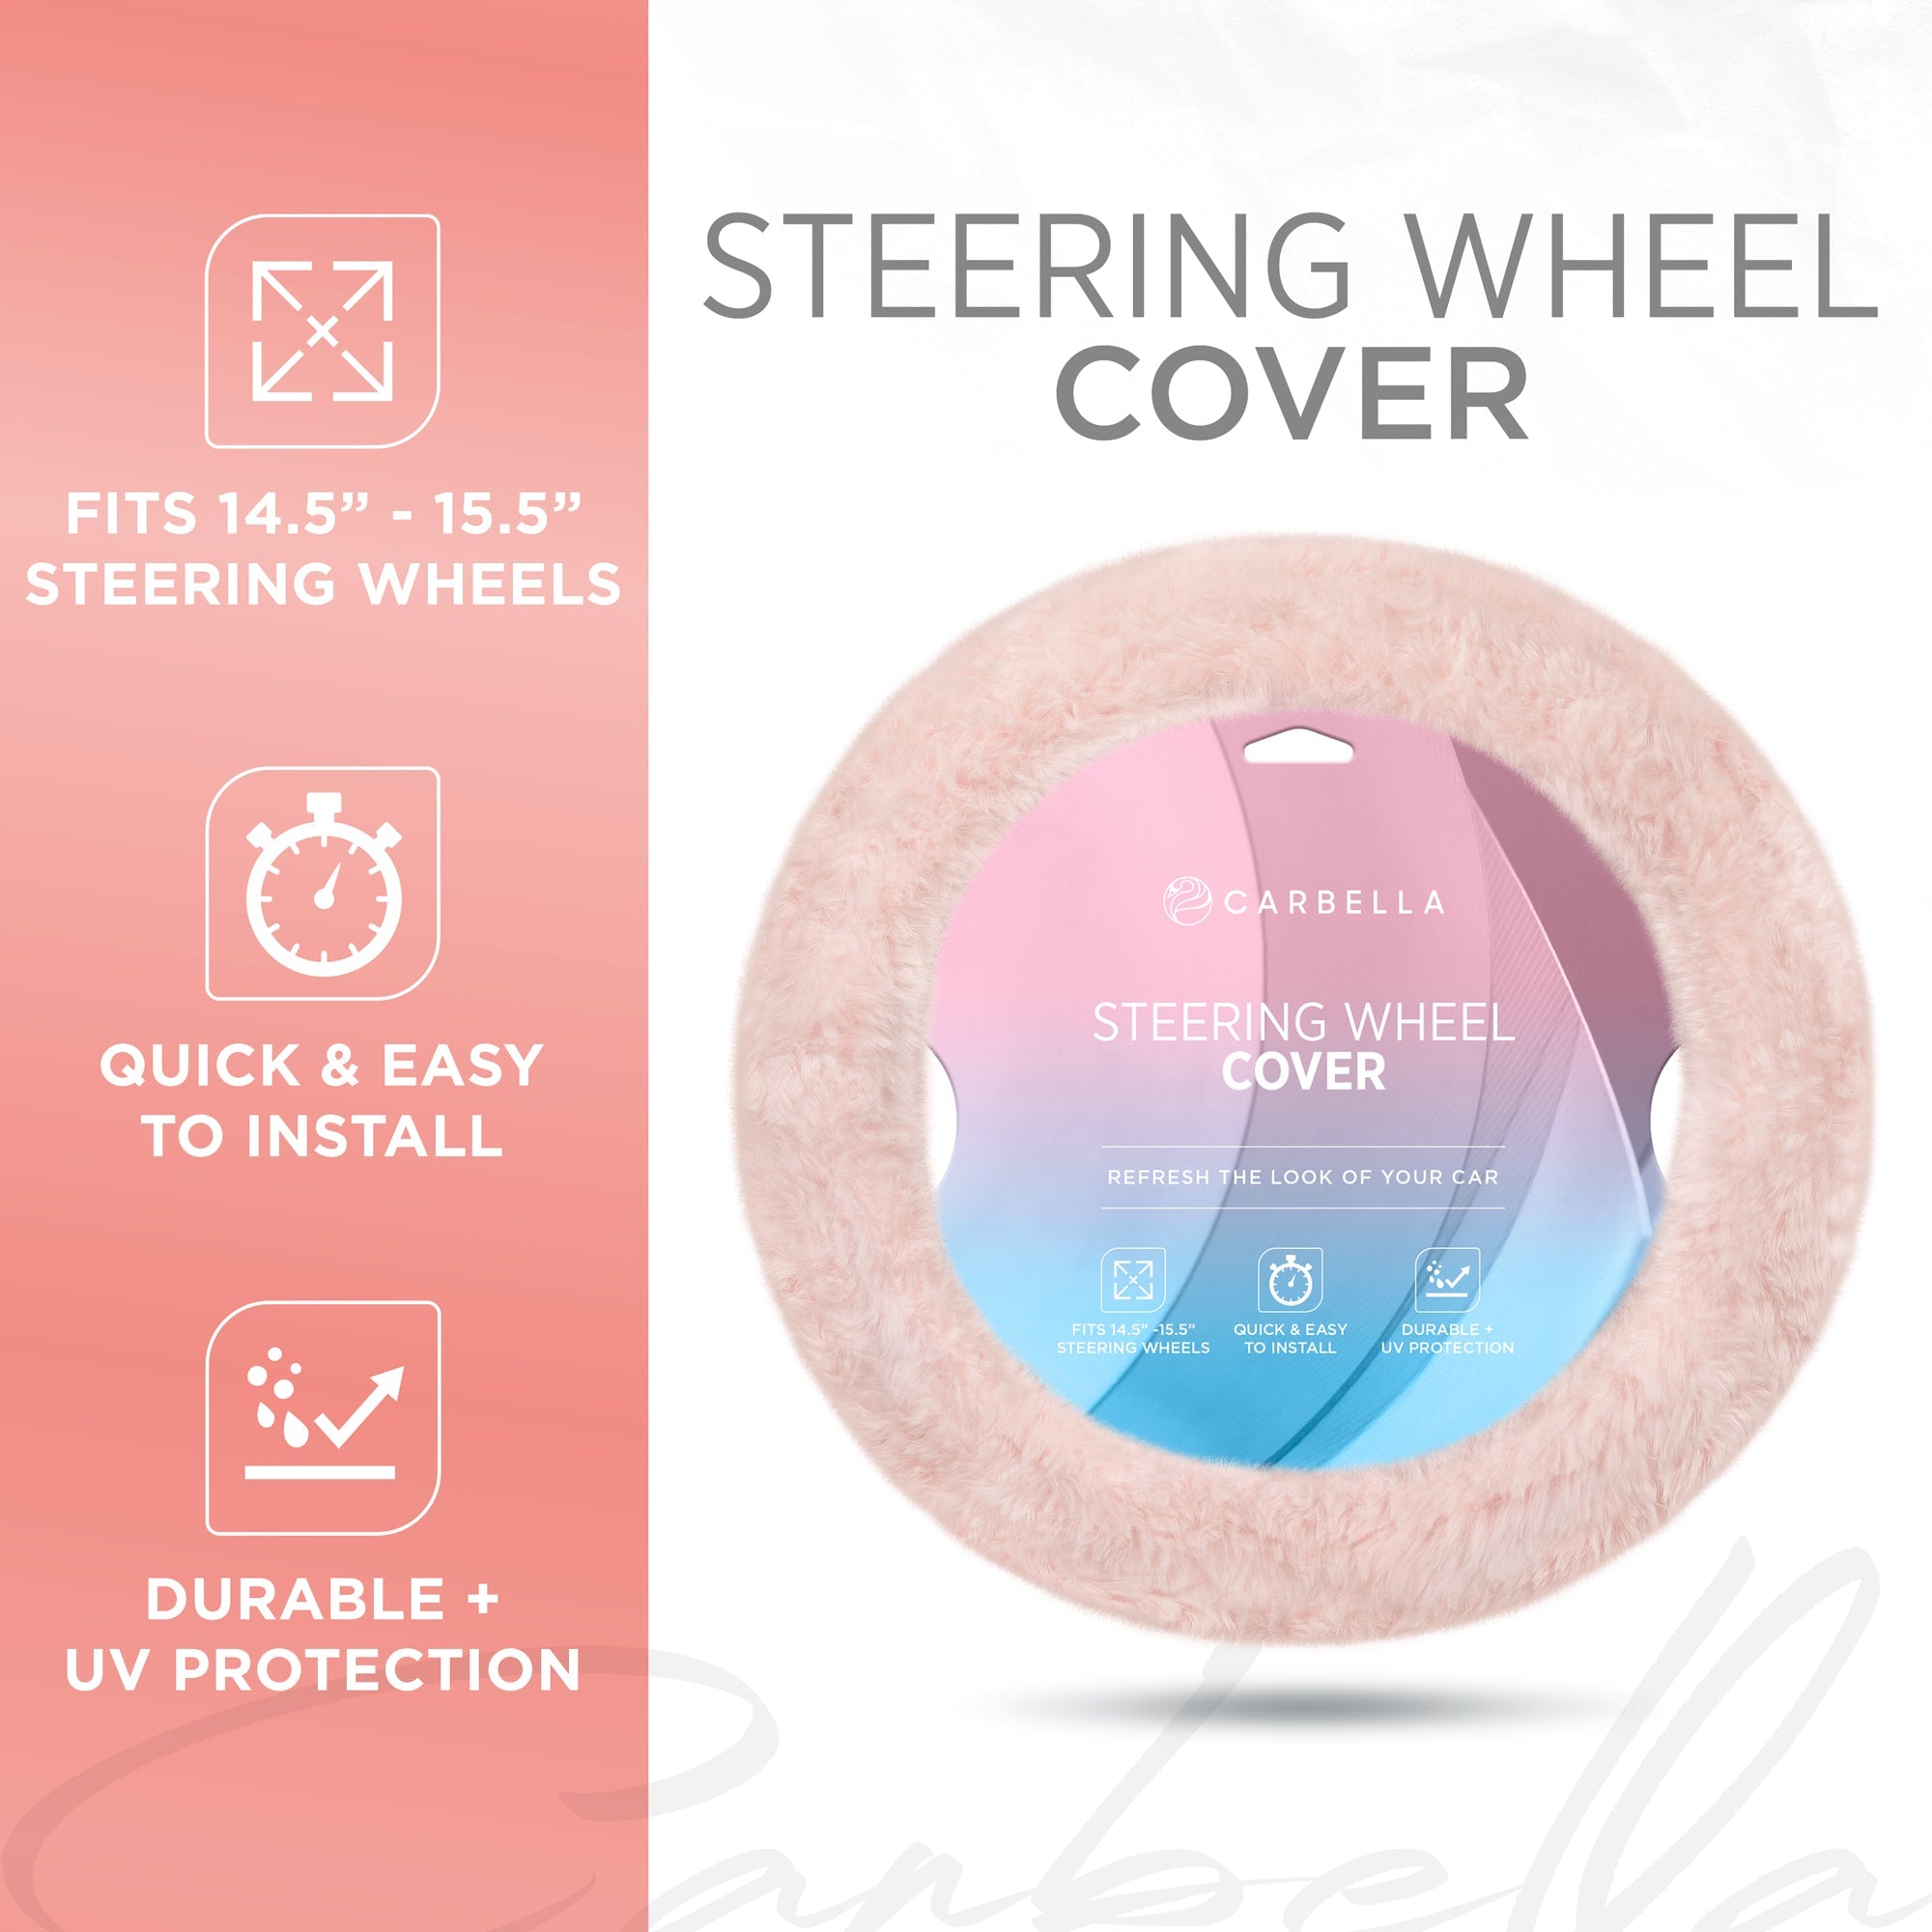 Carbella Soft Pink Fuzzy Steering Wheel Cover, Standard 15 Inch Size Fits Most Vehicles, Cute Faux Fur Car Steering Cover with Soft Fluffy Furry Touch, Car Accessories for Women - Soft Pink:#FFCCCC